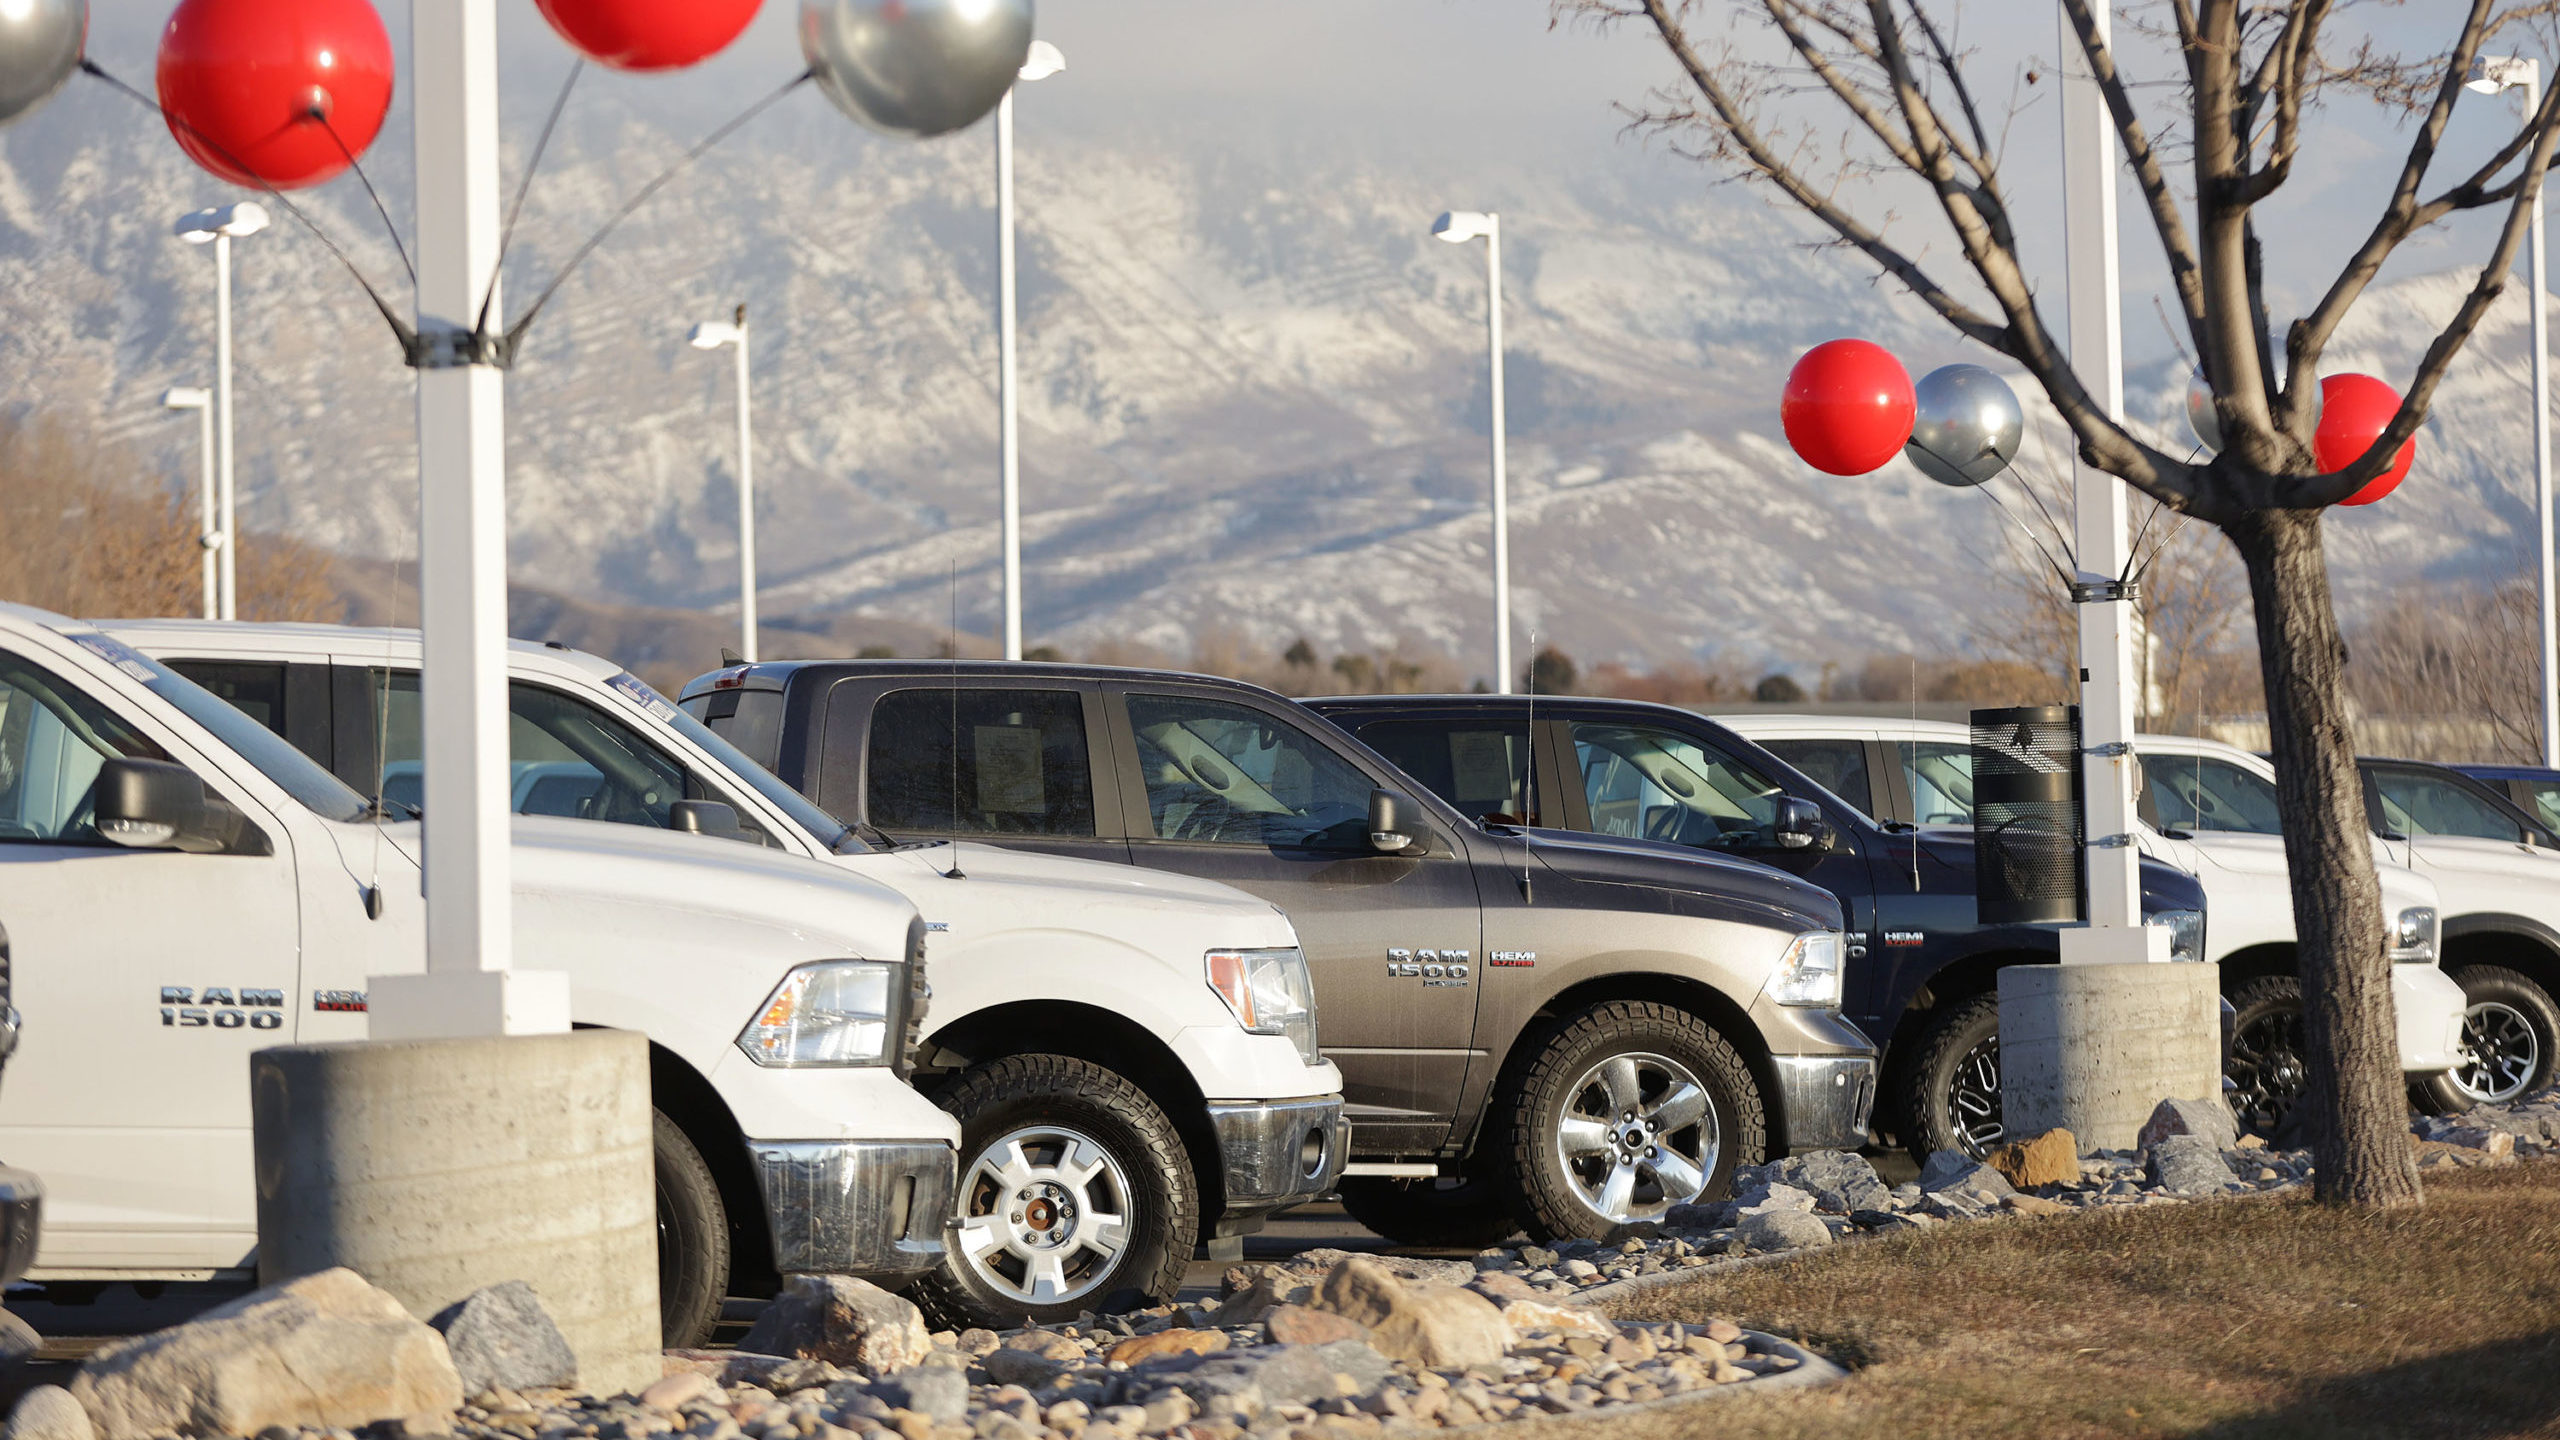 Trucks are lined up for sale at Low Book Sales in Lindon on Thursday, Feb. 3, 2022. Most new vehicl...